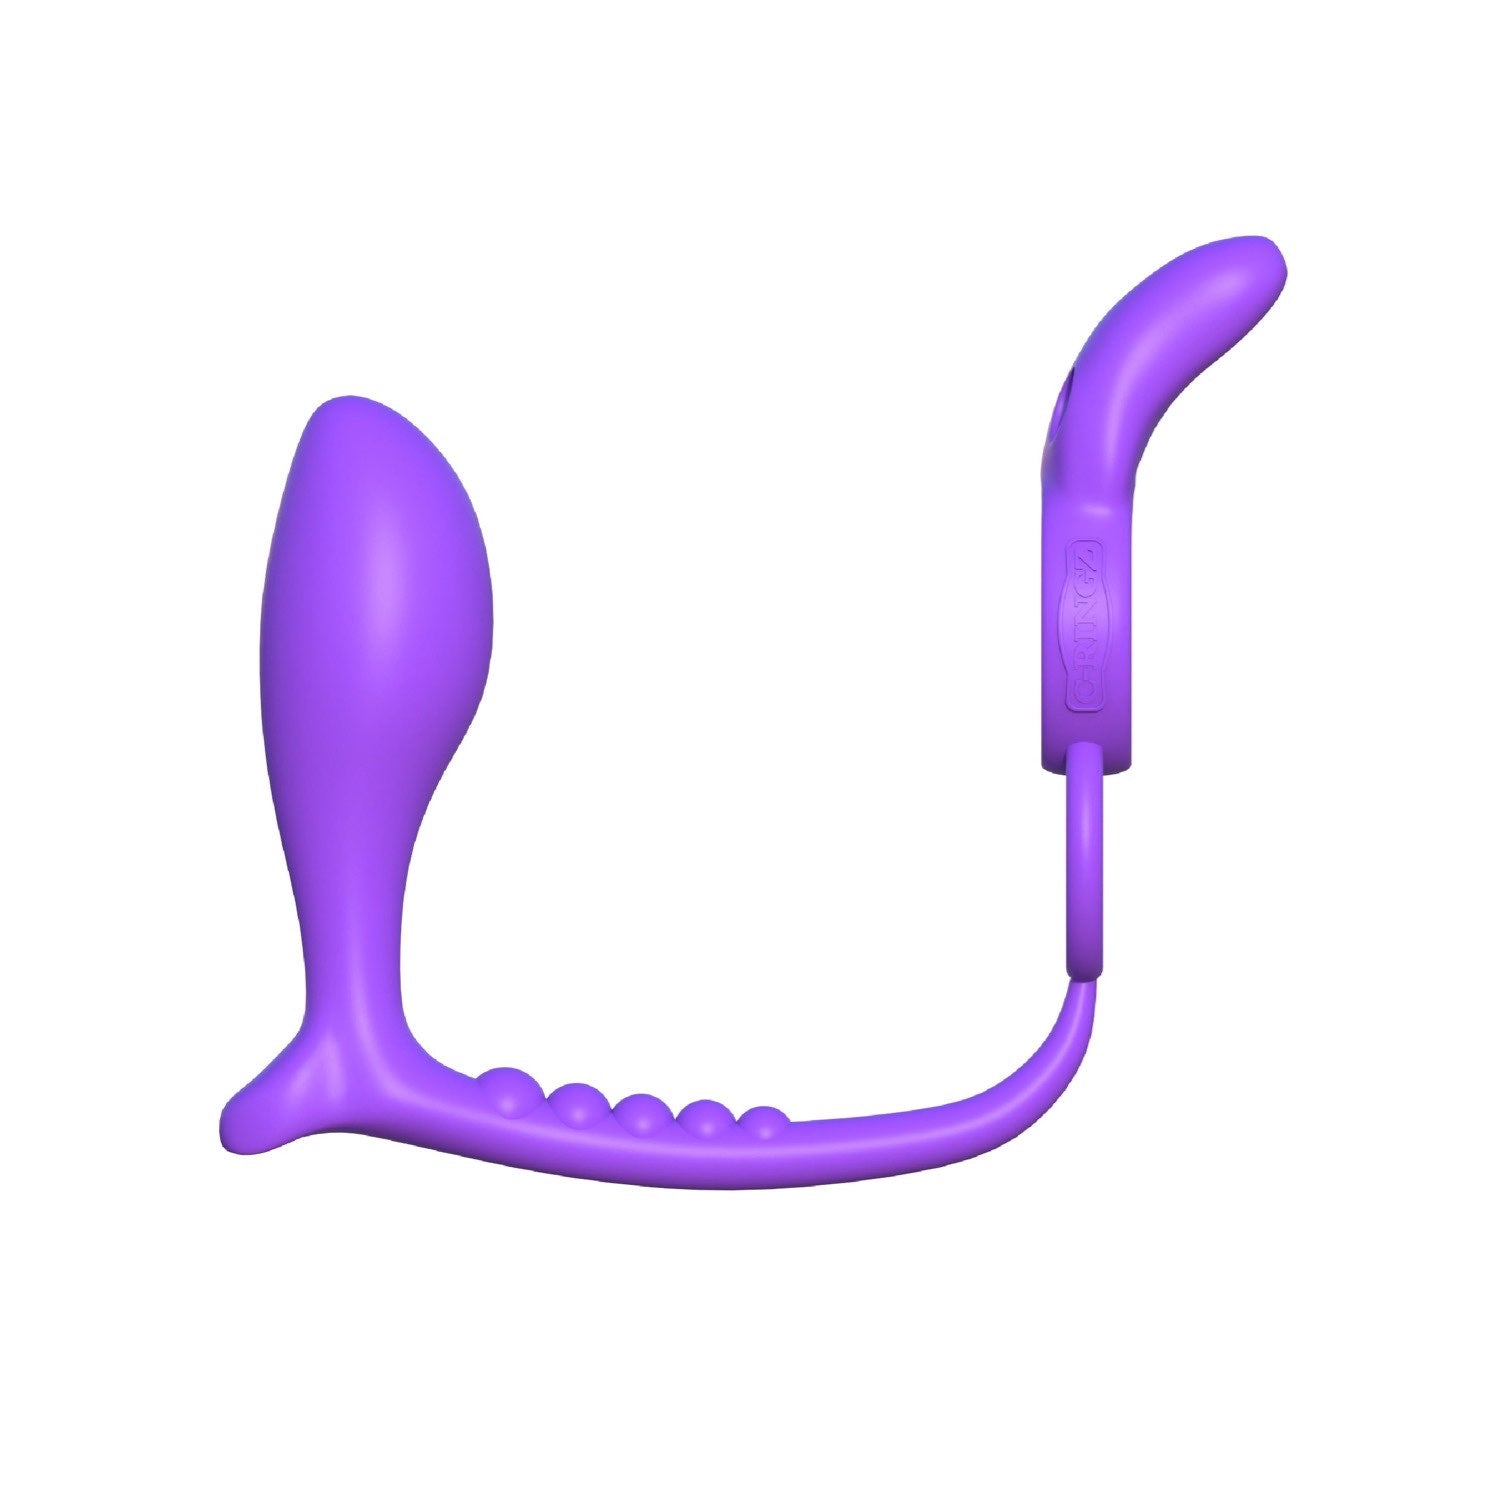 Fantasy C-Ringz Fantasy C-ringz Ass-gasm Vibrating Rabbit - Purple Vibrating Cock Ring with Anal Plug by Pipedream